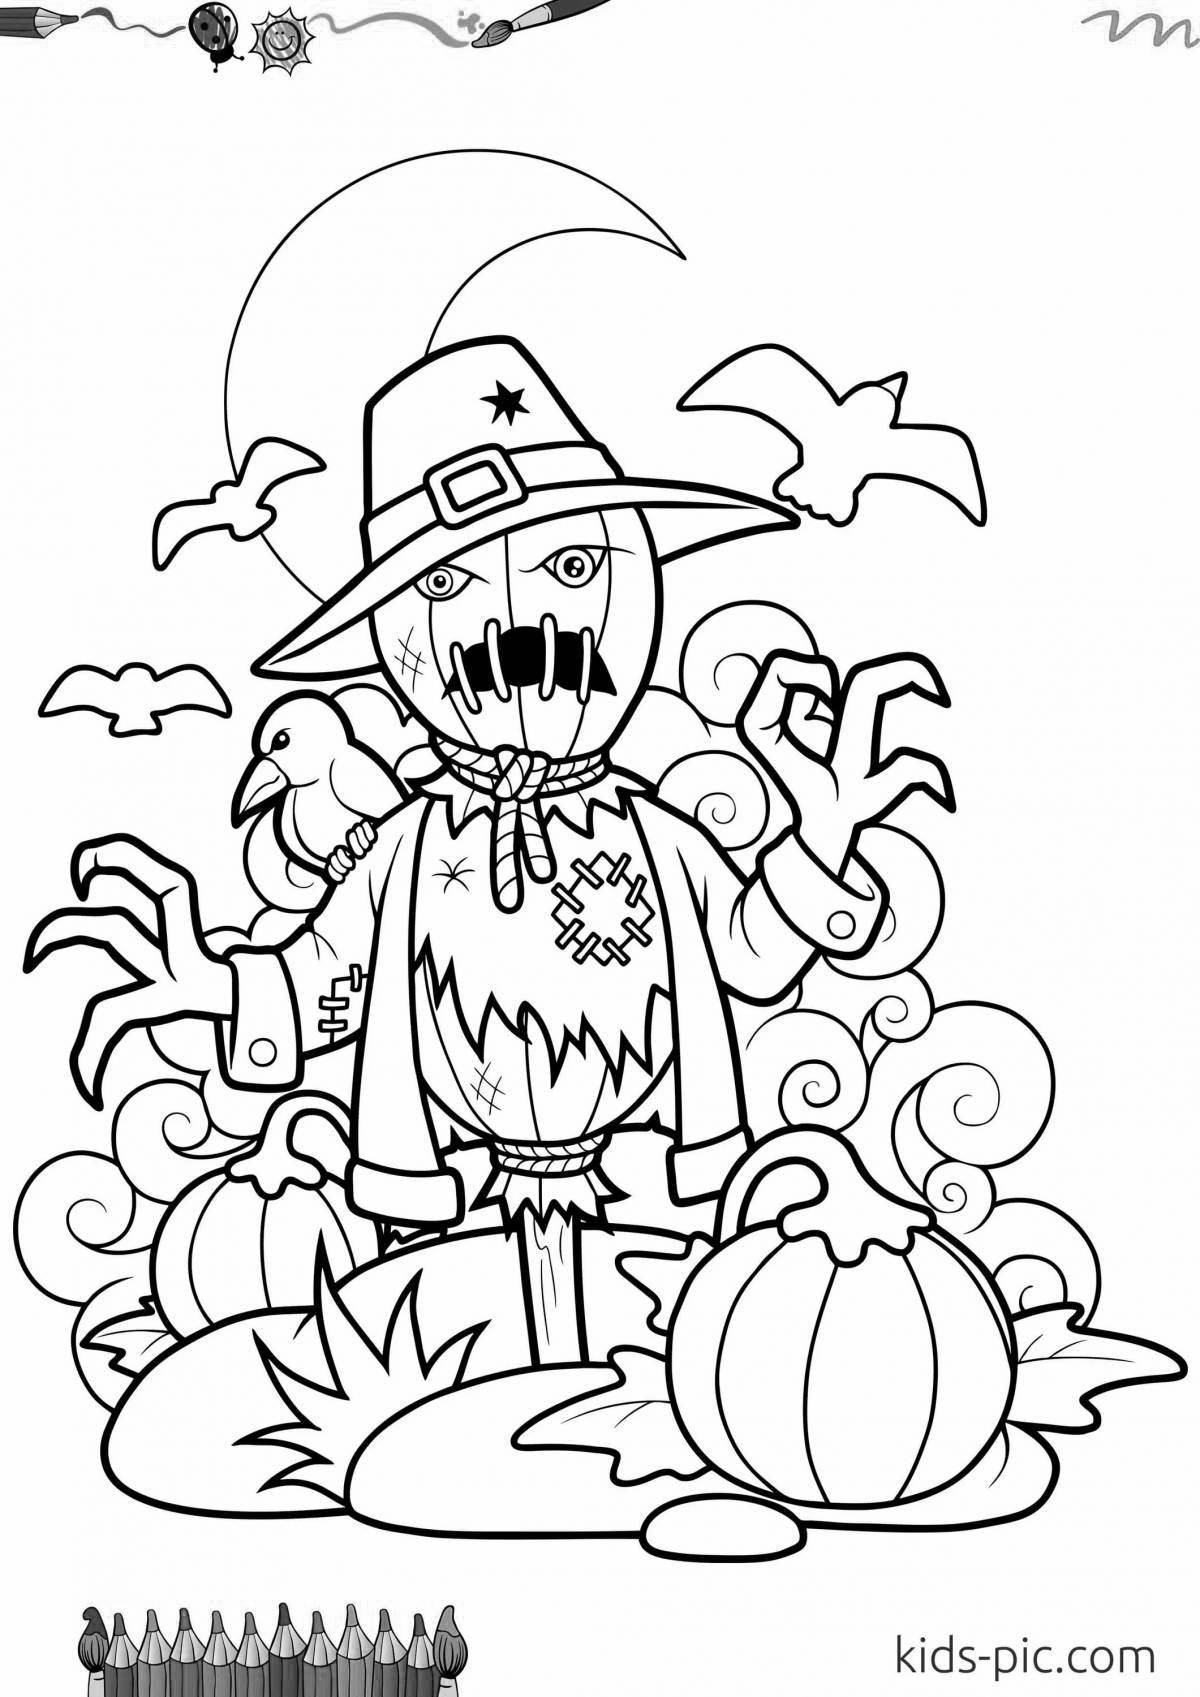 Coloring page adorable scarecrow